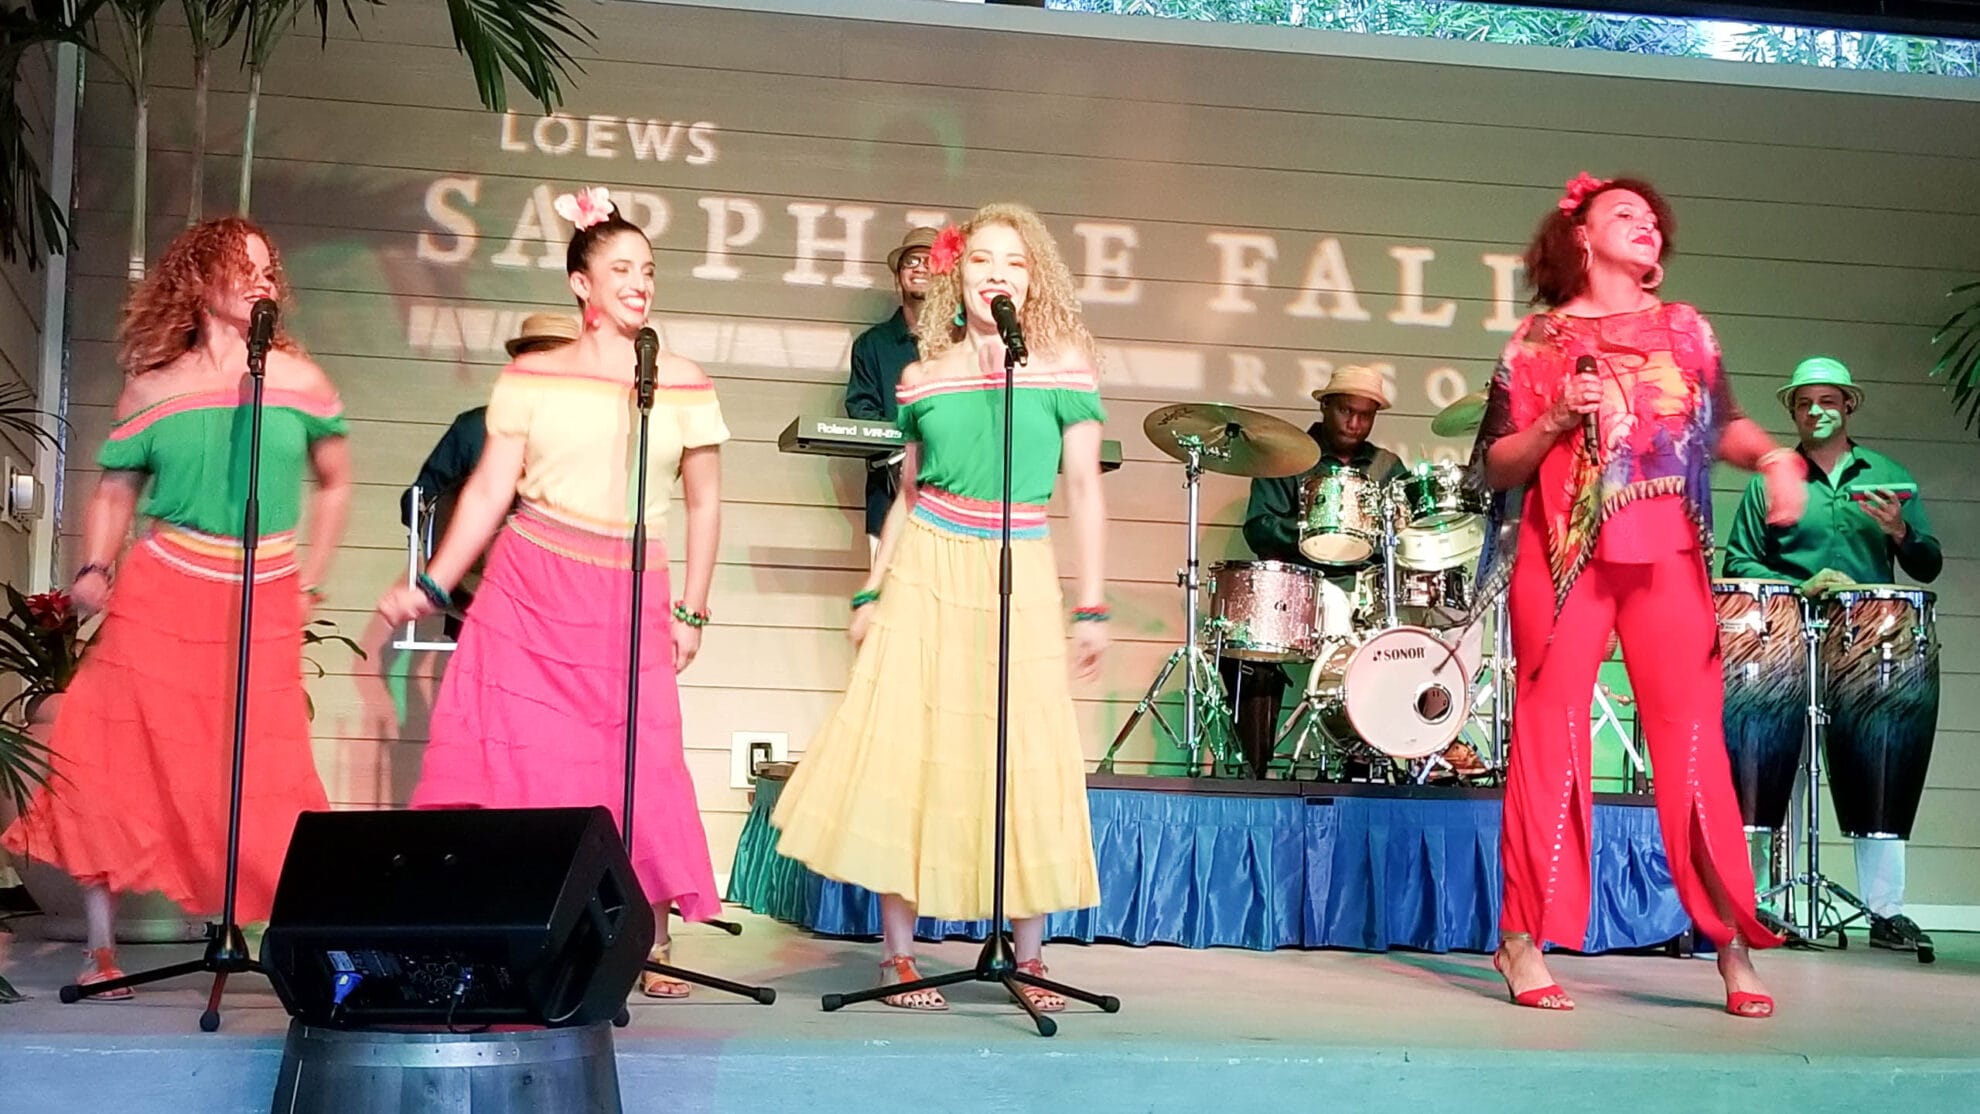 dinner show at sapphire falls